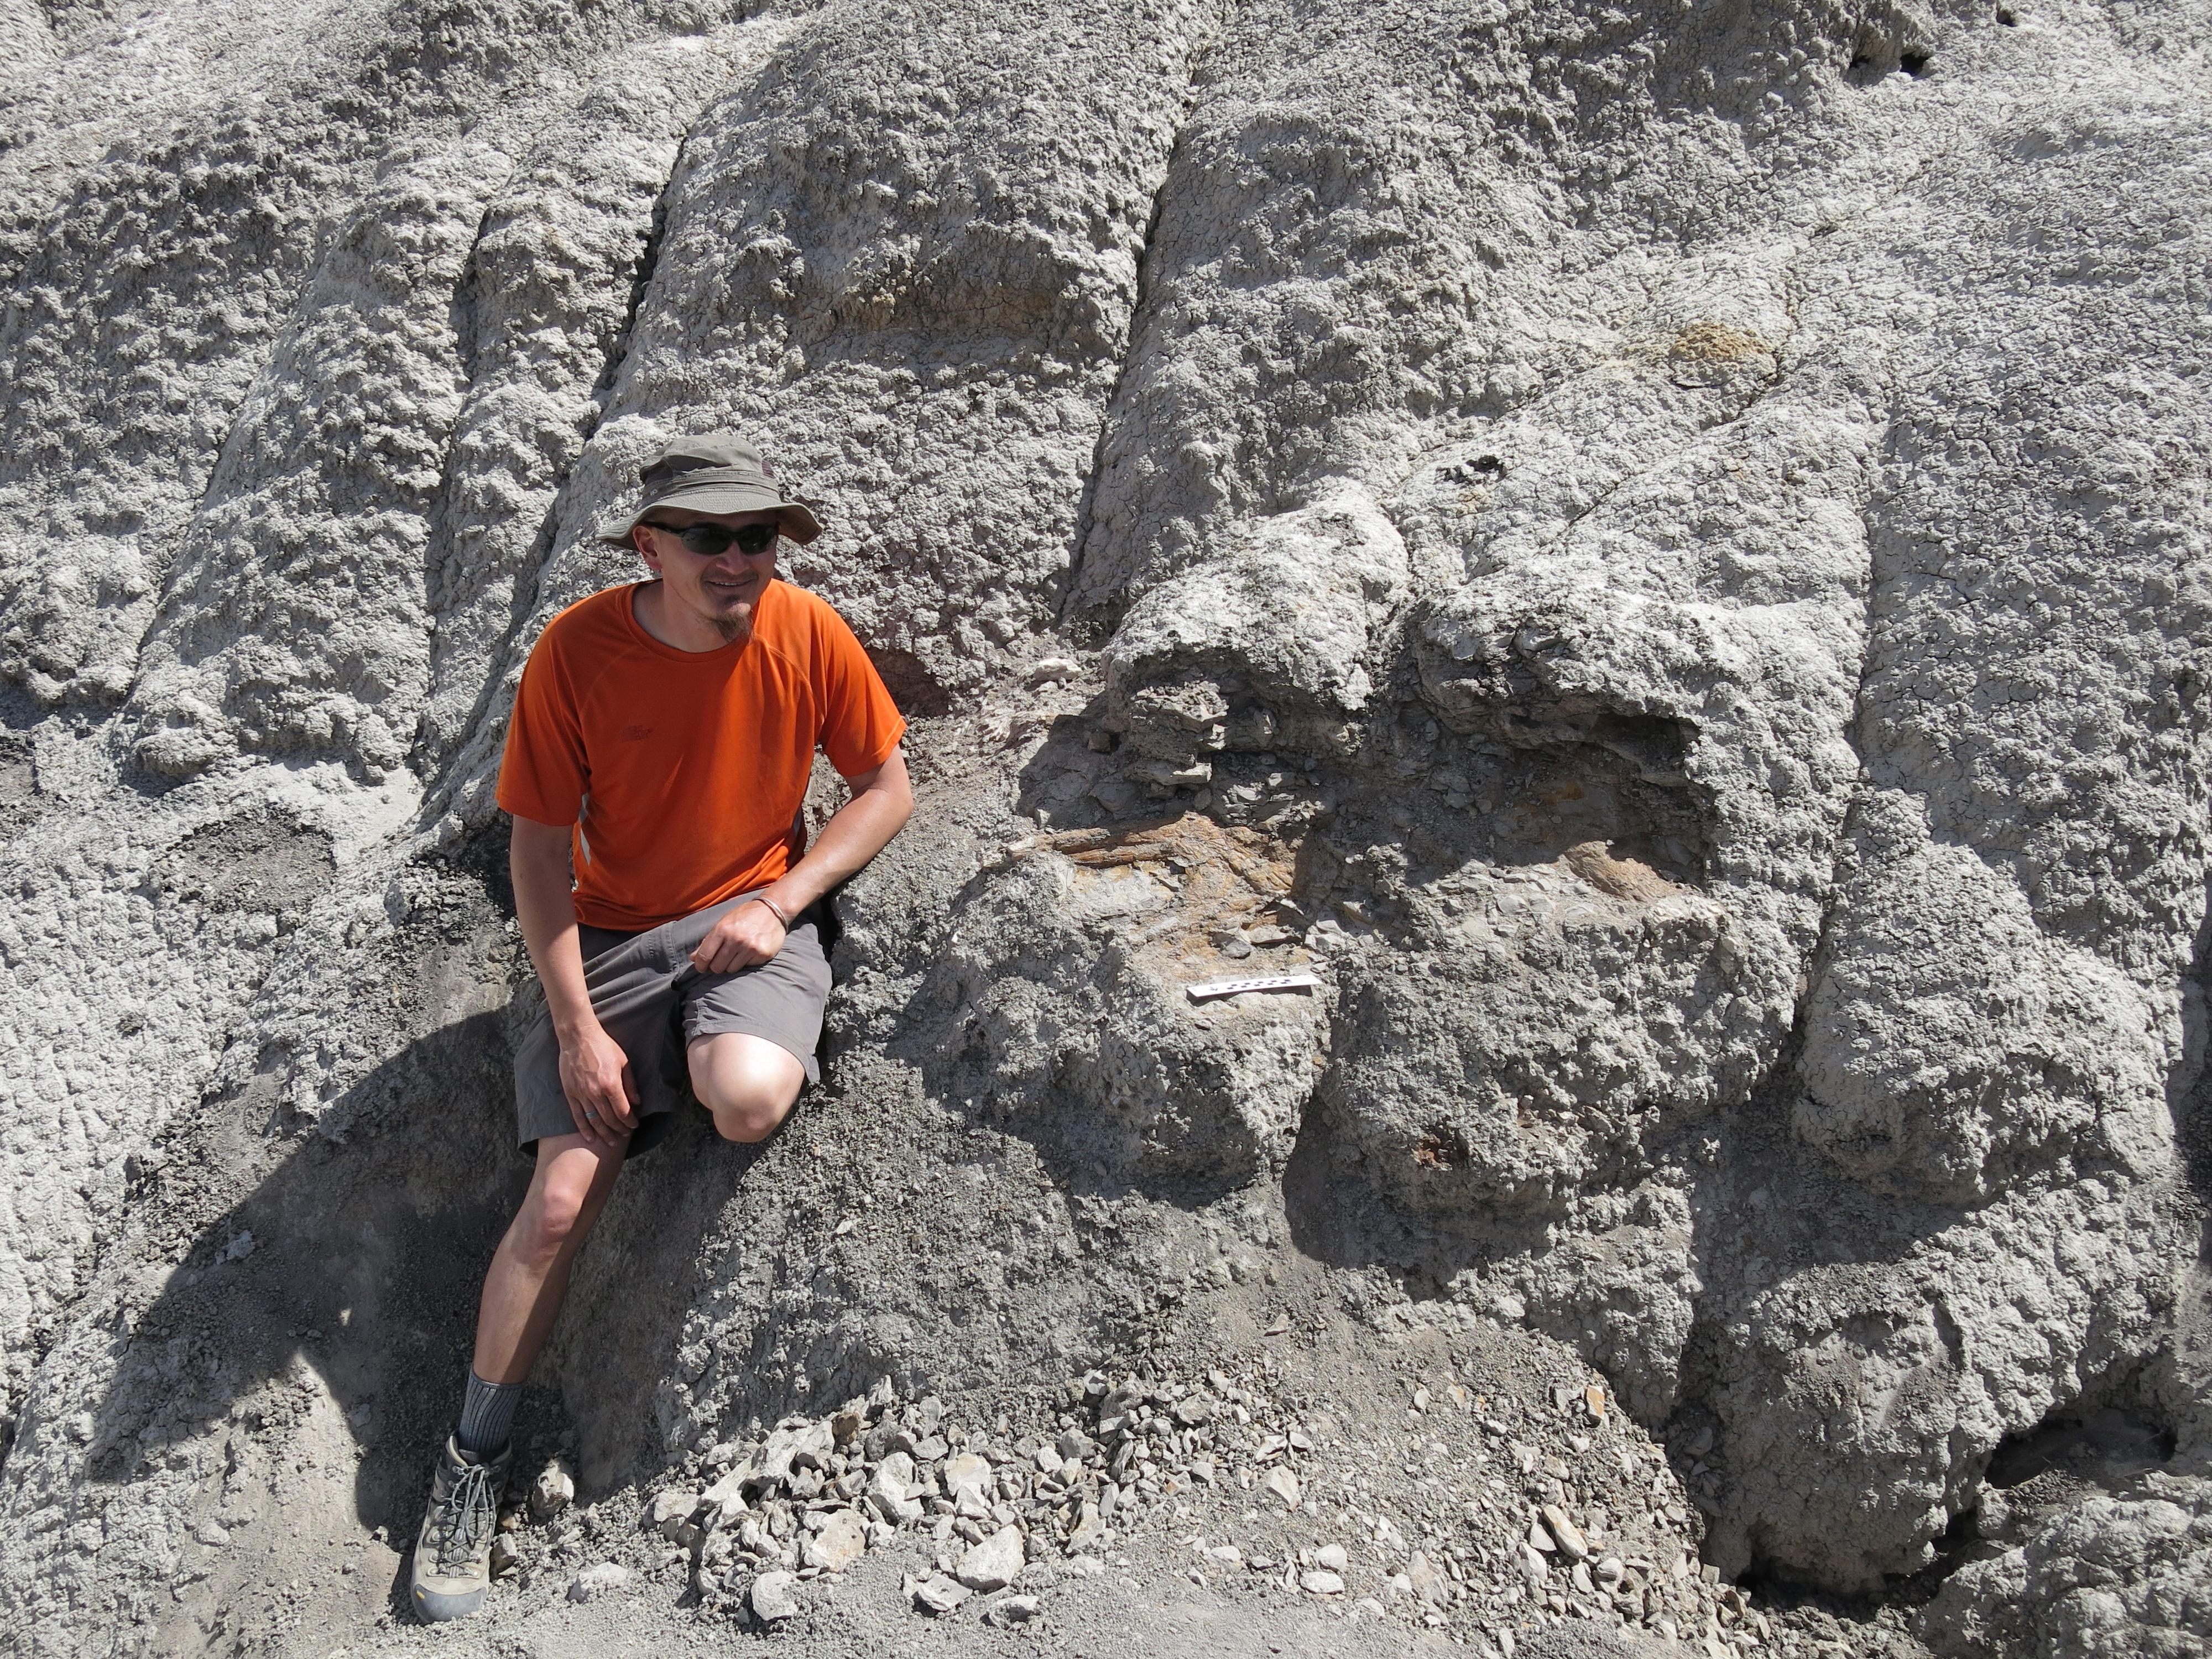 Sitting next to the freshly uncovered skull of Pentaceratops that I discovered in the Cretaceous of New Mexico.